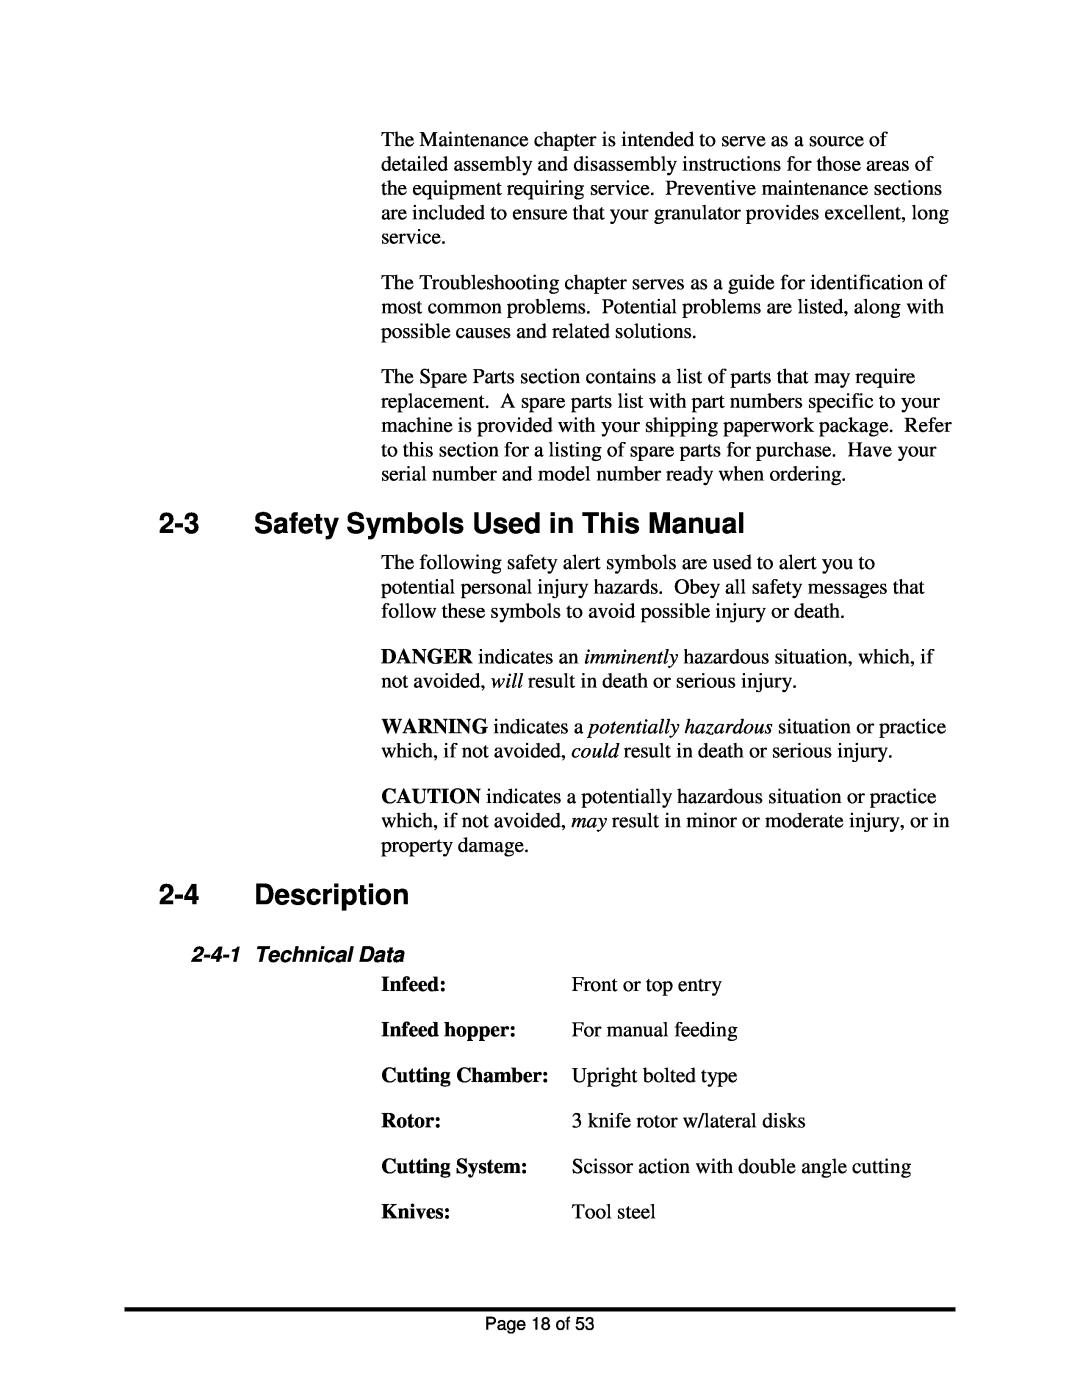 Sterling BP1018, BP1012 installation manual 2-3Safety Symbols Used in This Manual, 2-4Description, 2-4-1Technical Data 